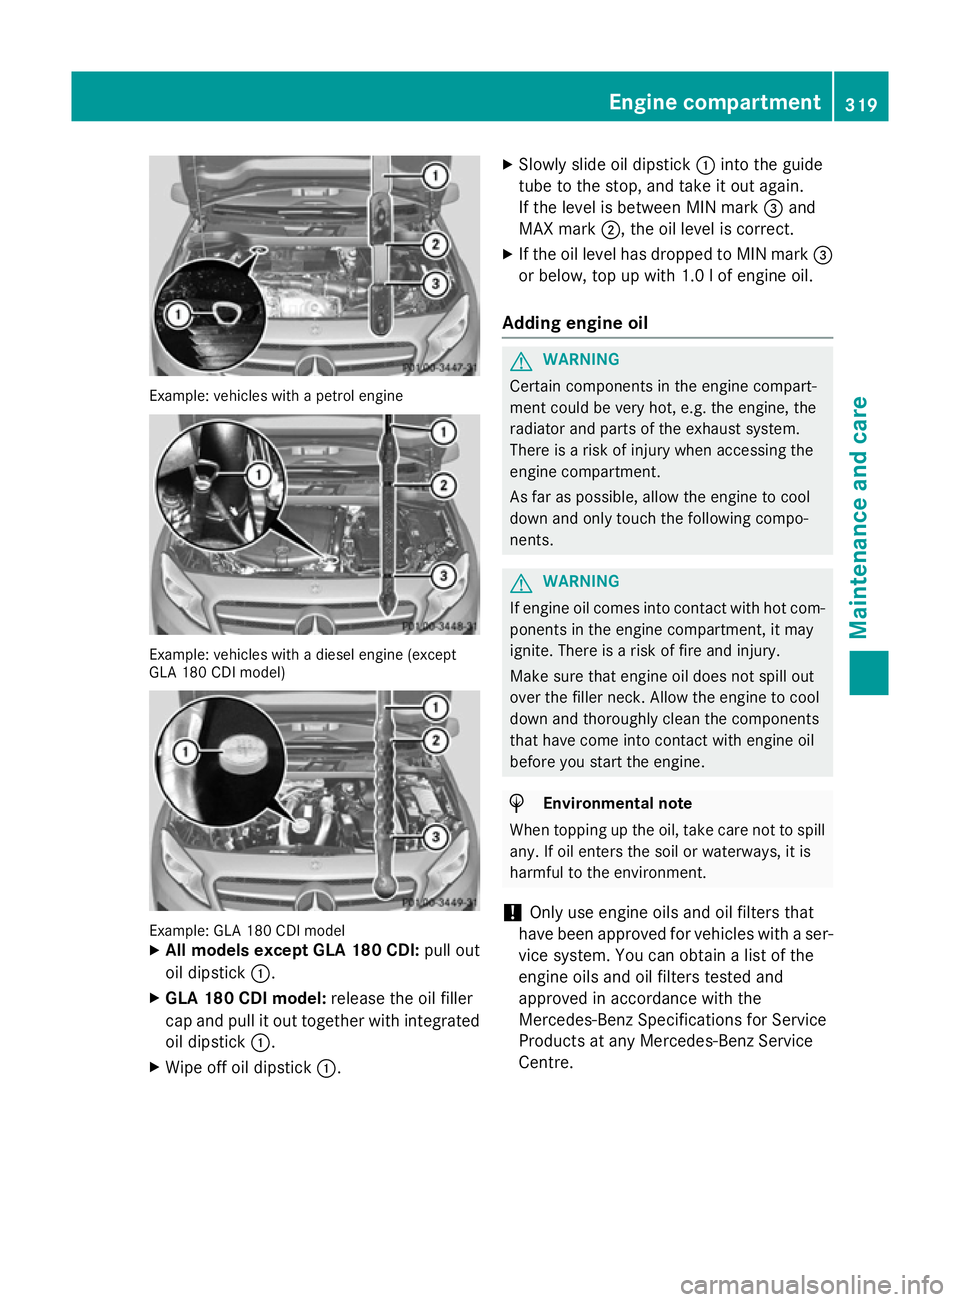 MERCEDES-BENZ GLA SUV 2013  Owners Manual Example: vehicles with a petrol engine
Example: vehicles with a diesel engine (except
GLA 180 CDI model) Example: GLA 180 CDI model
X
All models except GLA 180 CDI: pull out
oil dipstick :.
X GLA 180 